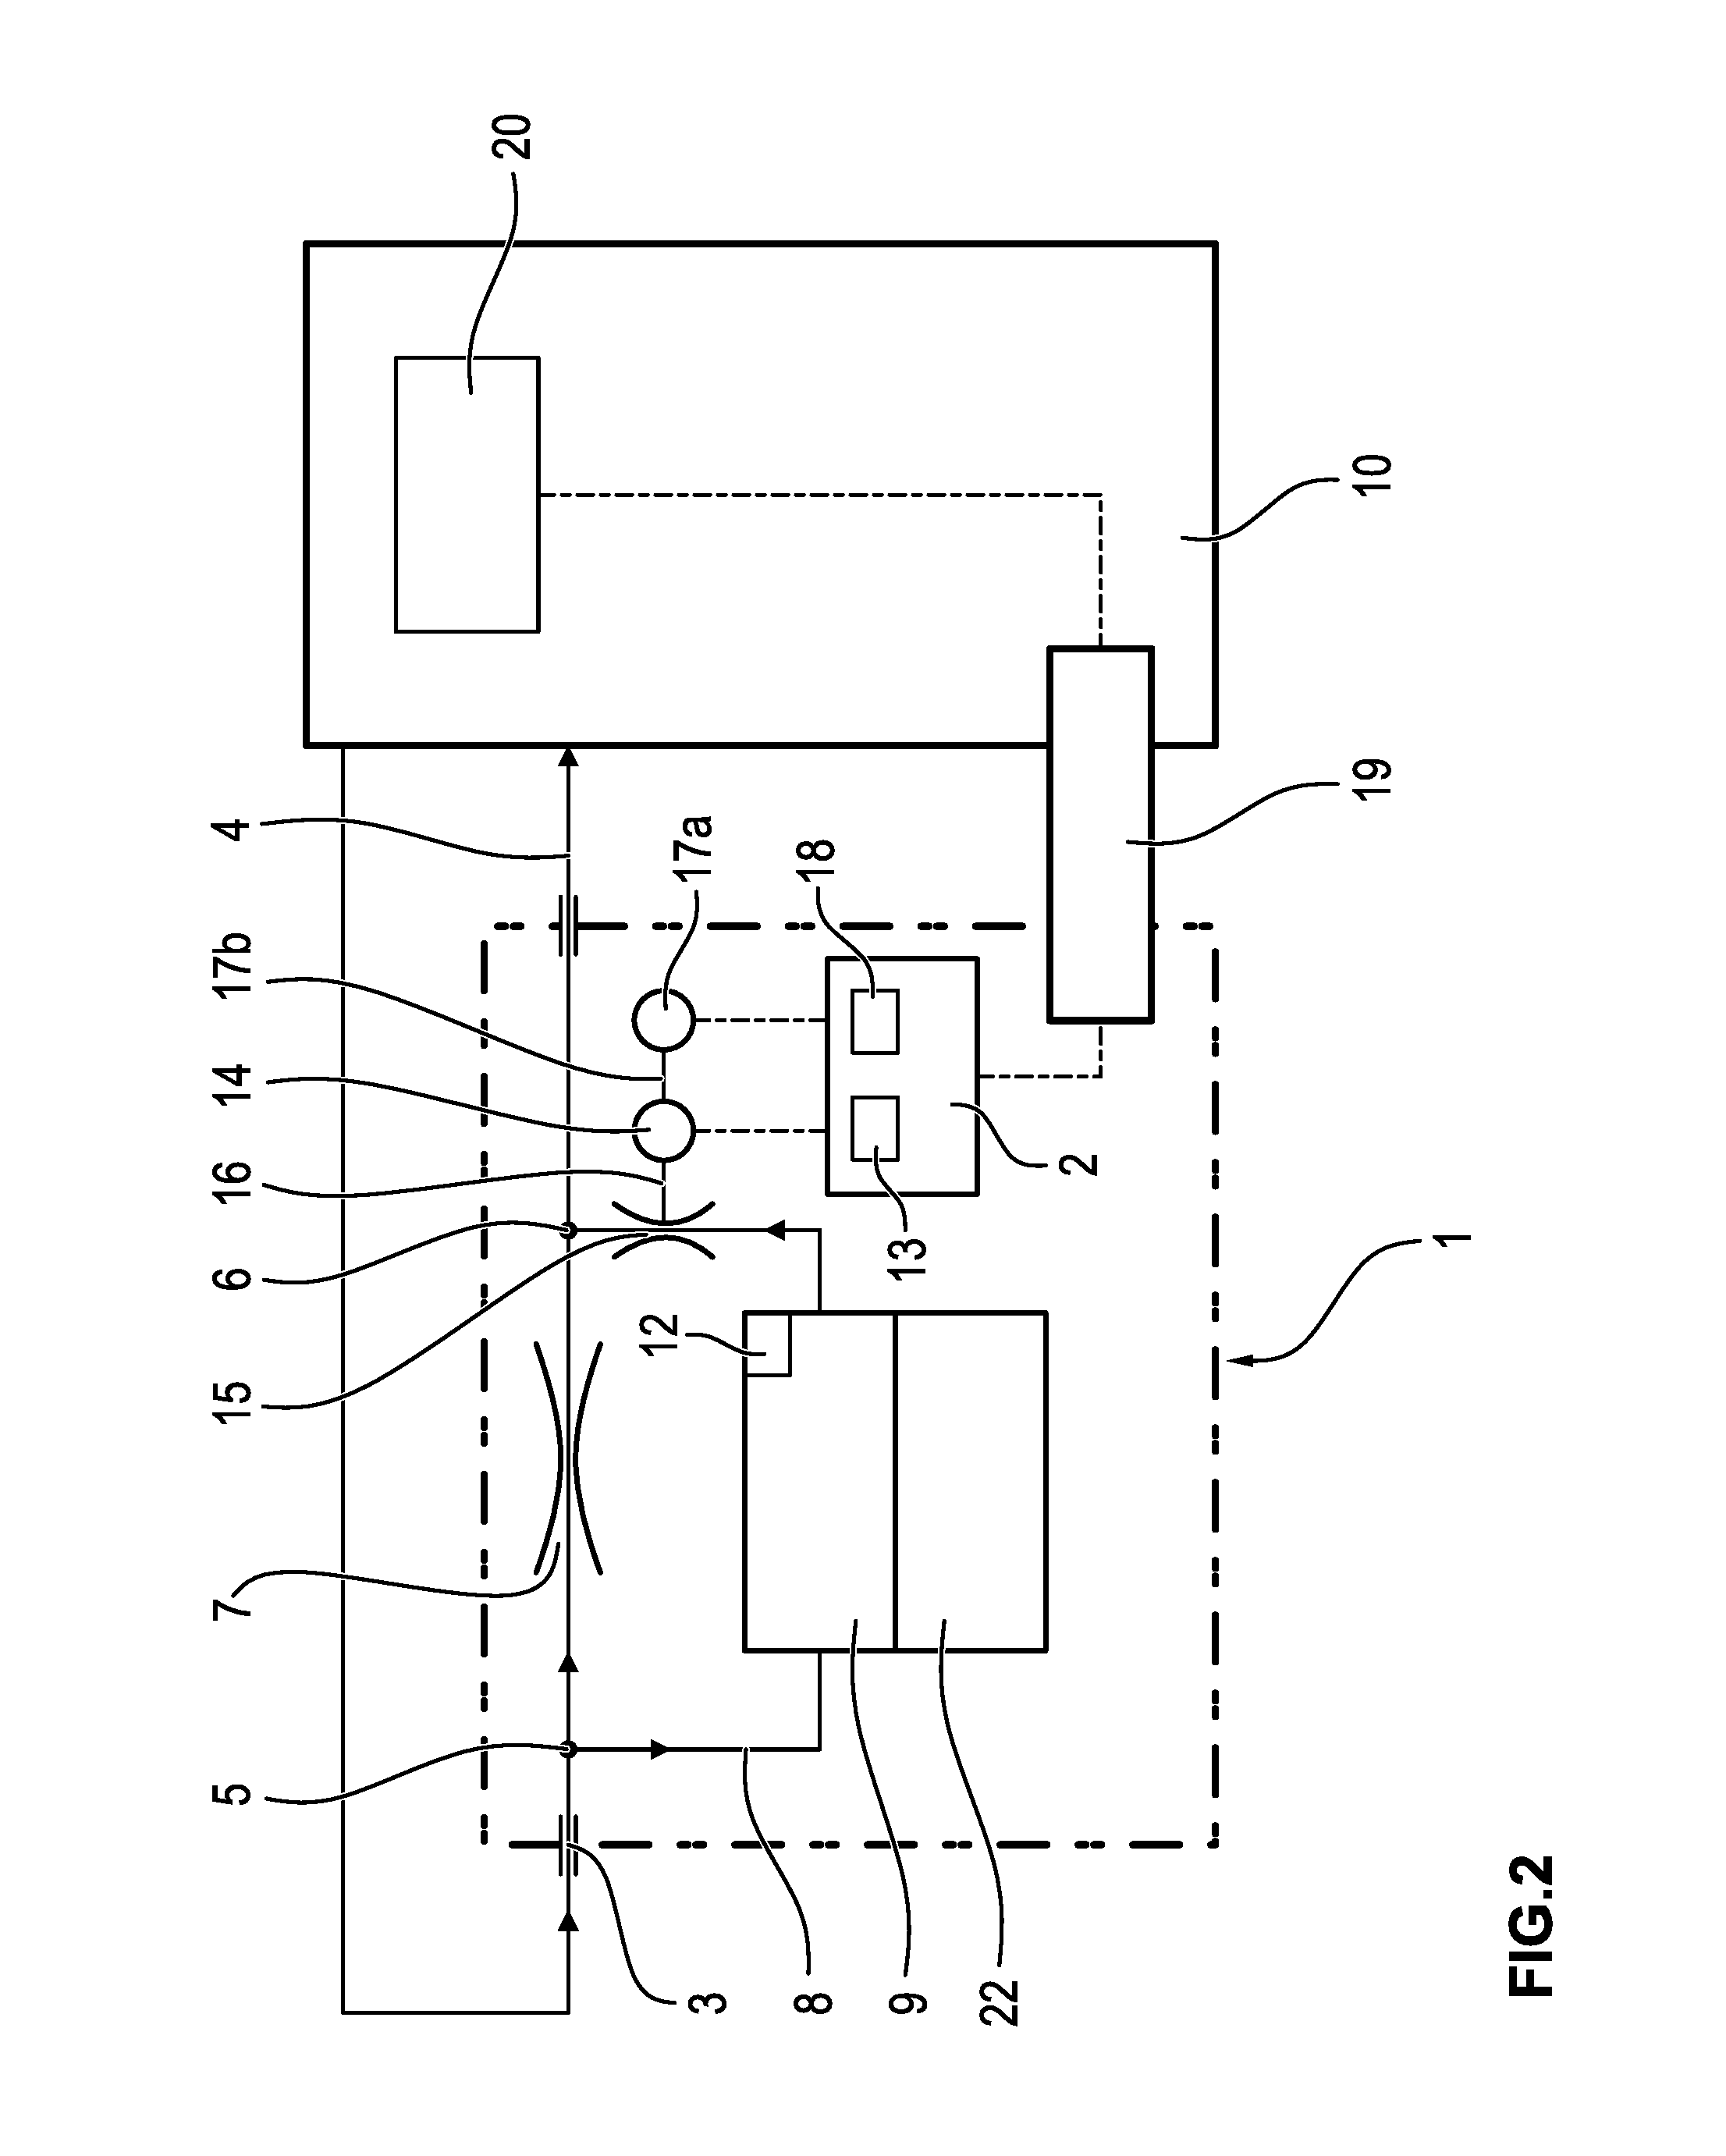 Anesthetic dispensing device